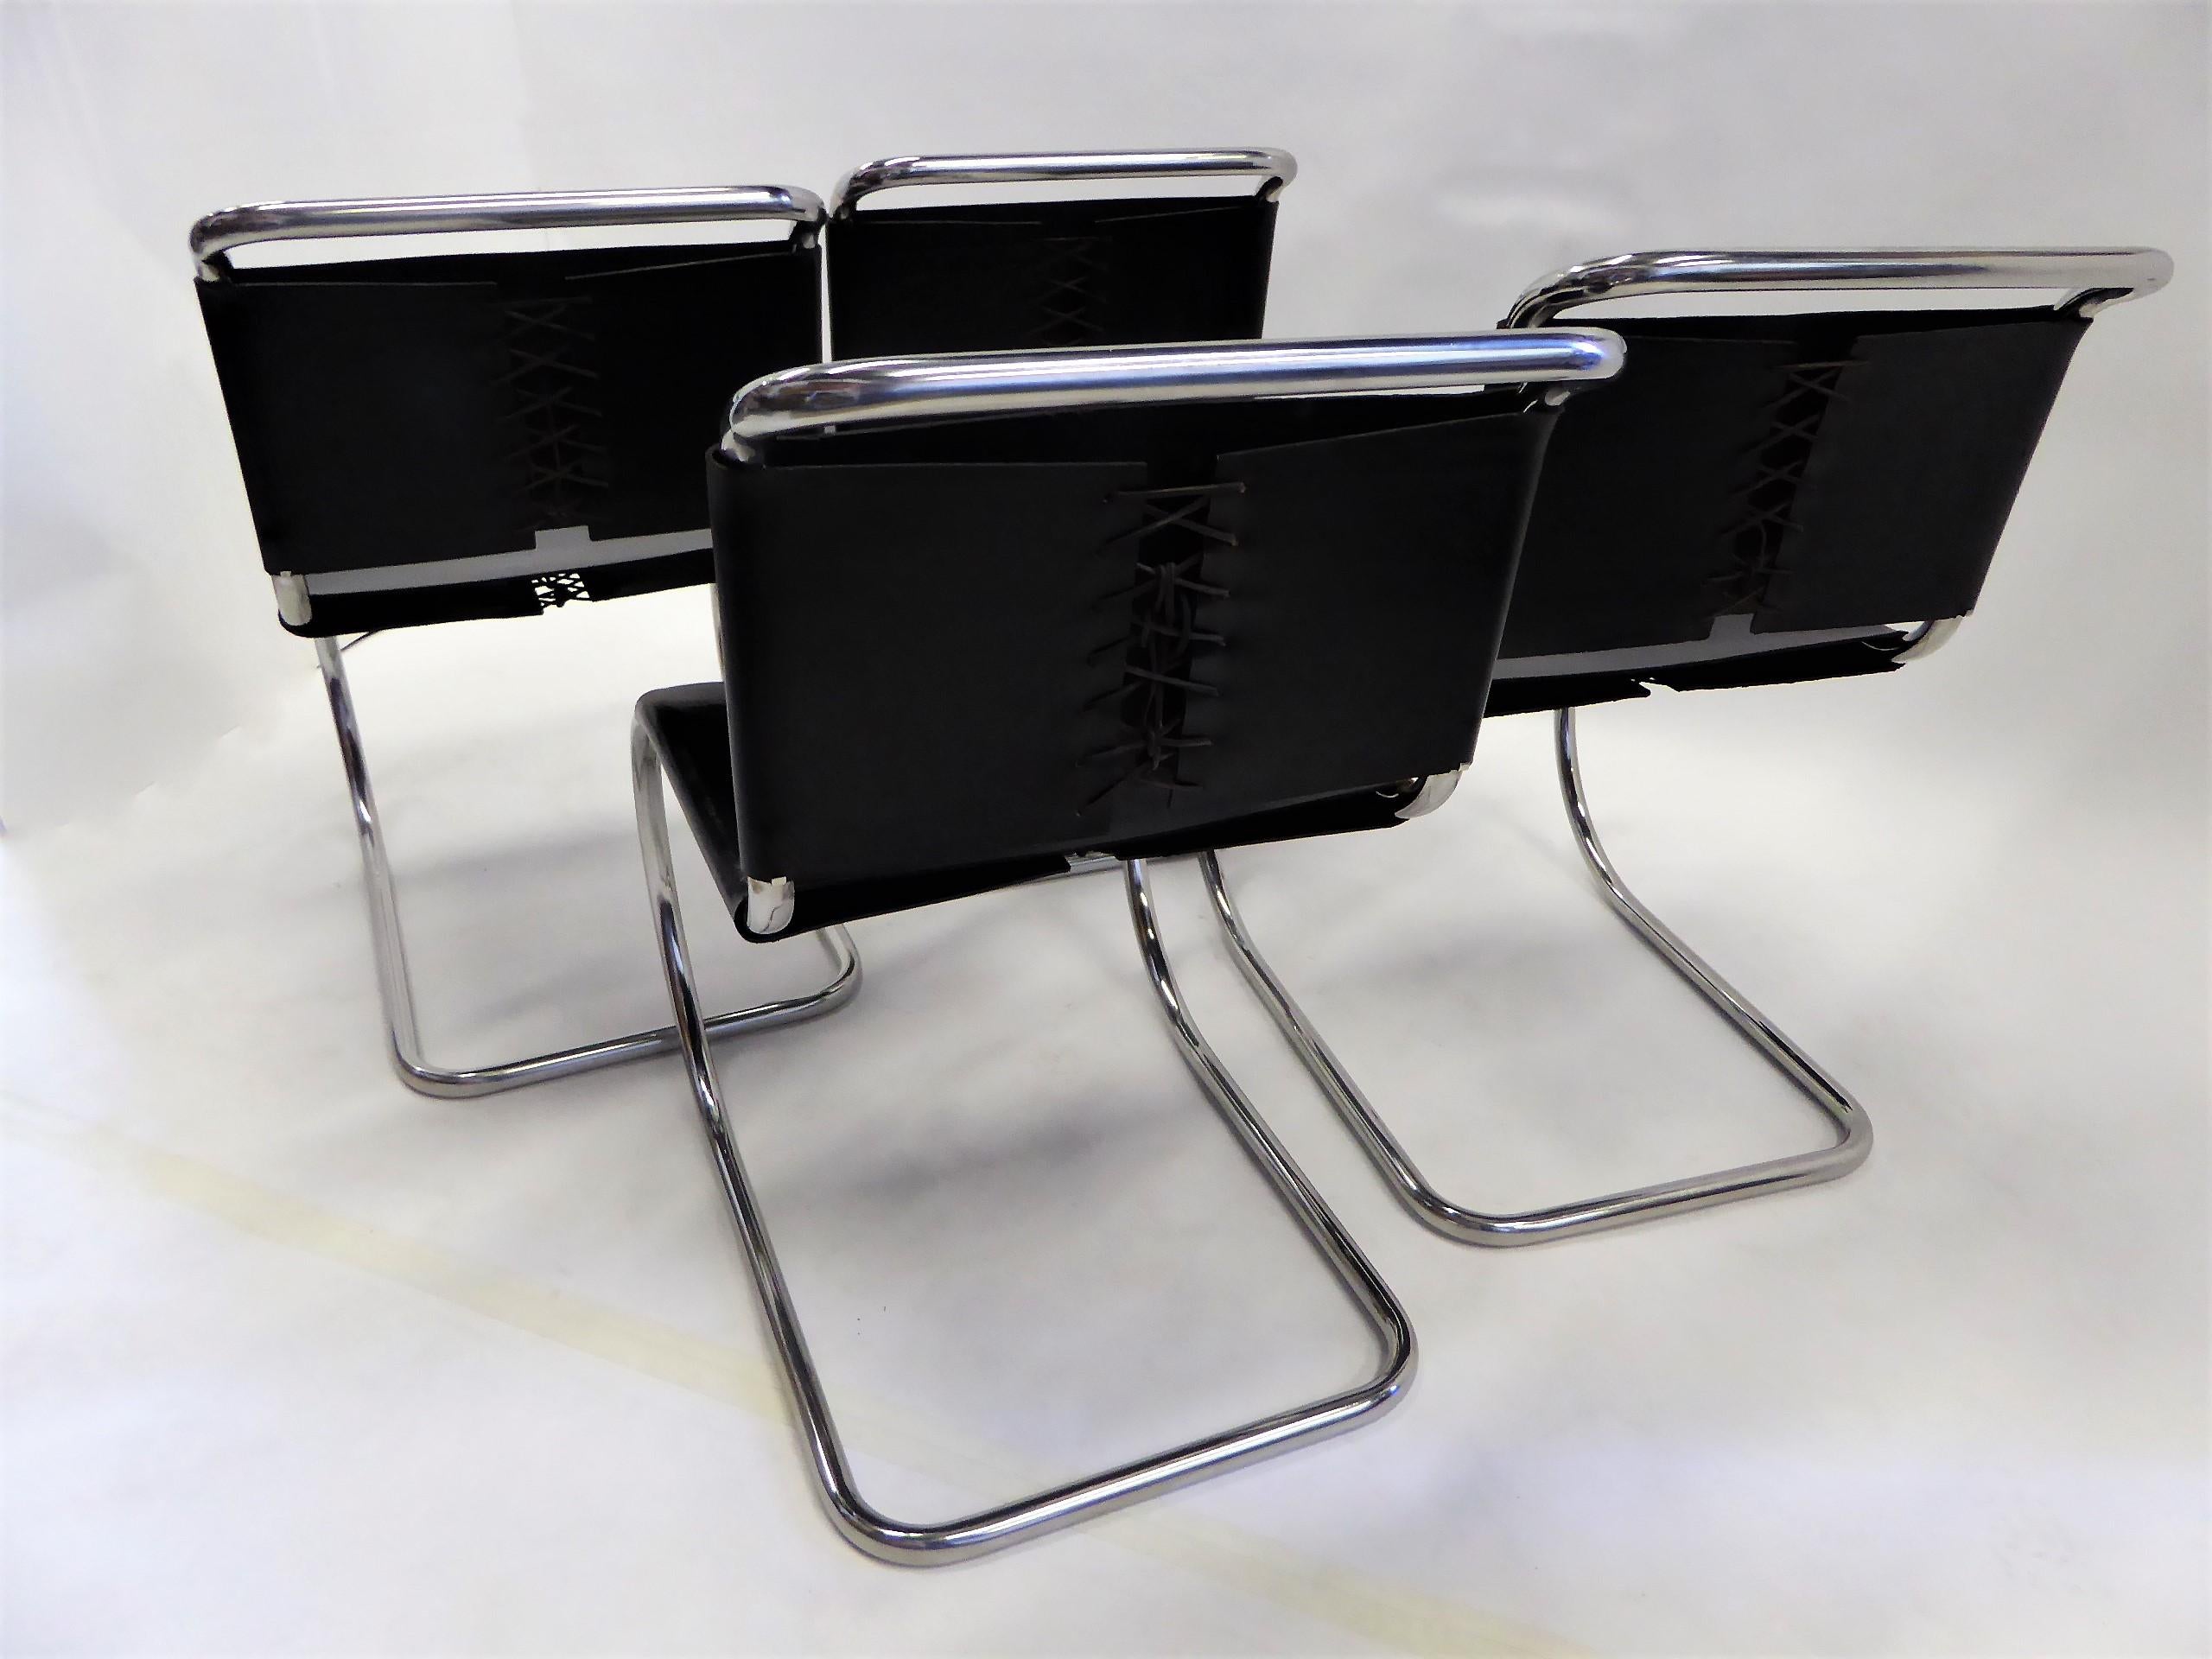 American Bauhaus Set of 4 Modern Black Leather Knoll MR10 Dining Chairs Mies van der Rohe